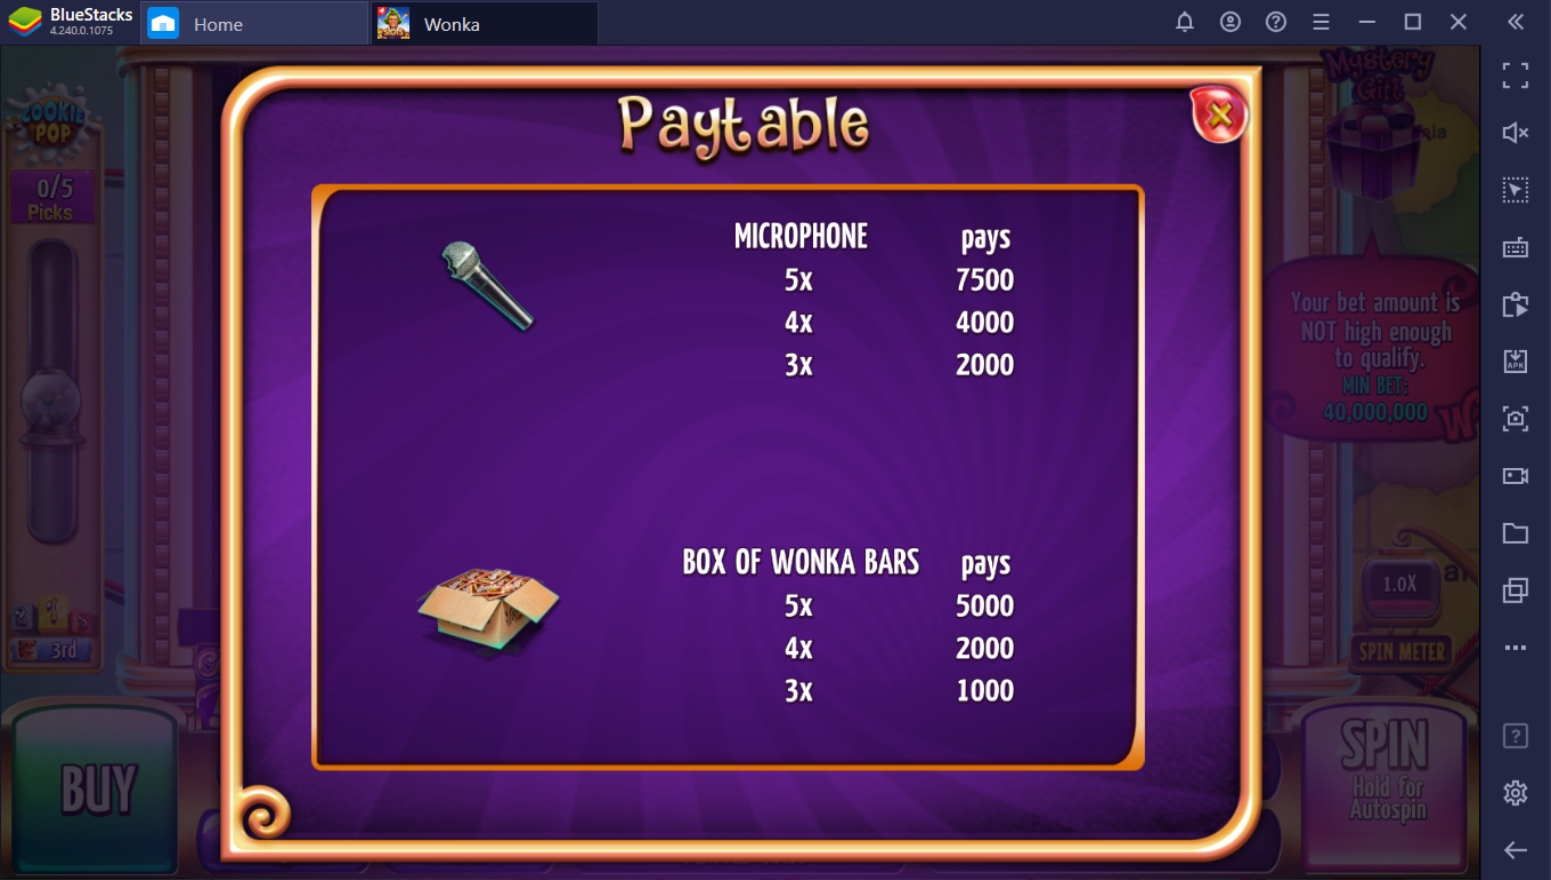 Beginner's Guide to Playing Willy Wonka Casino on PC